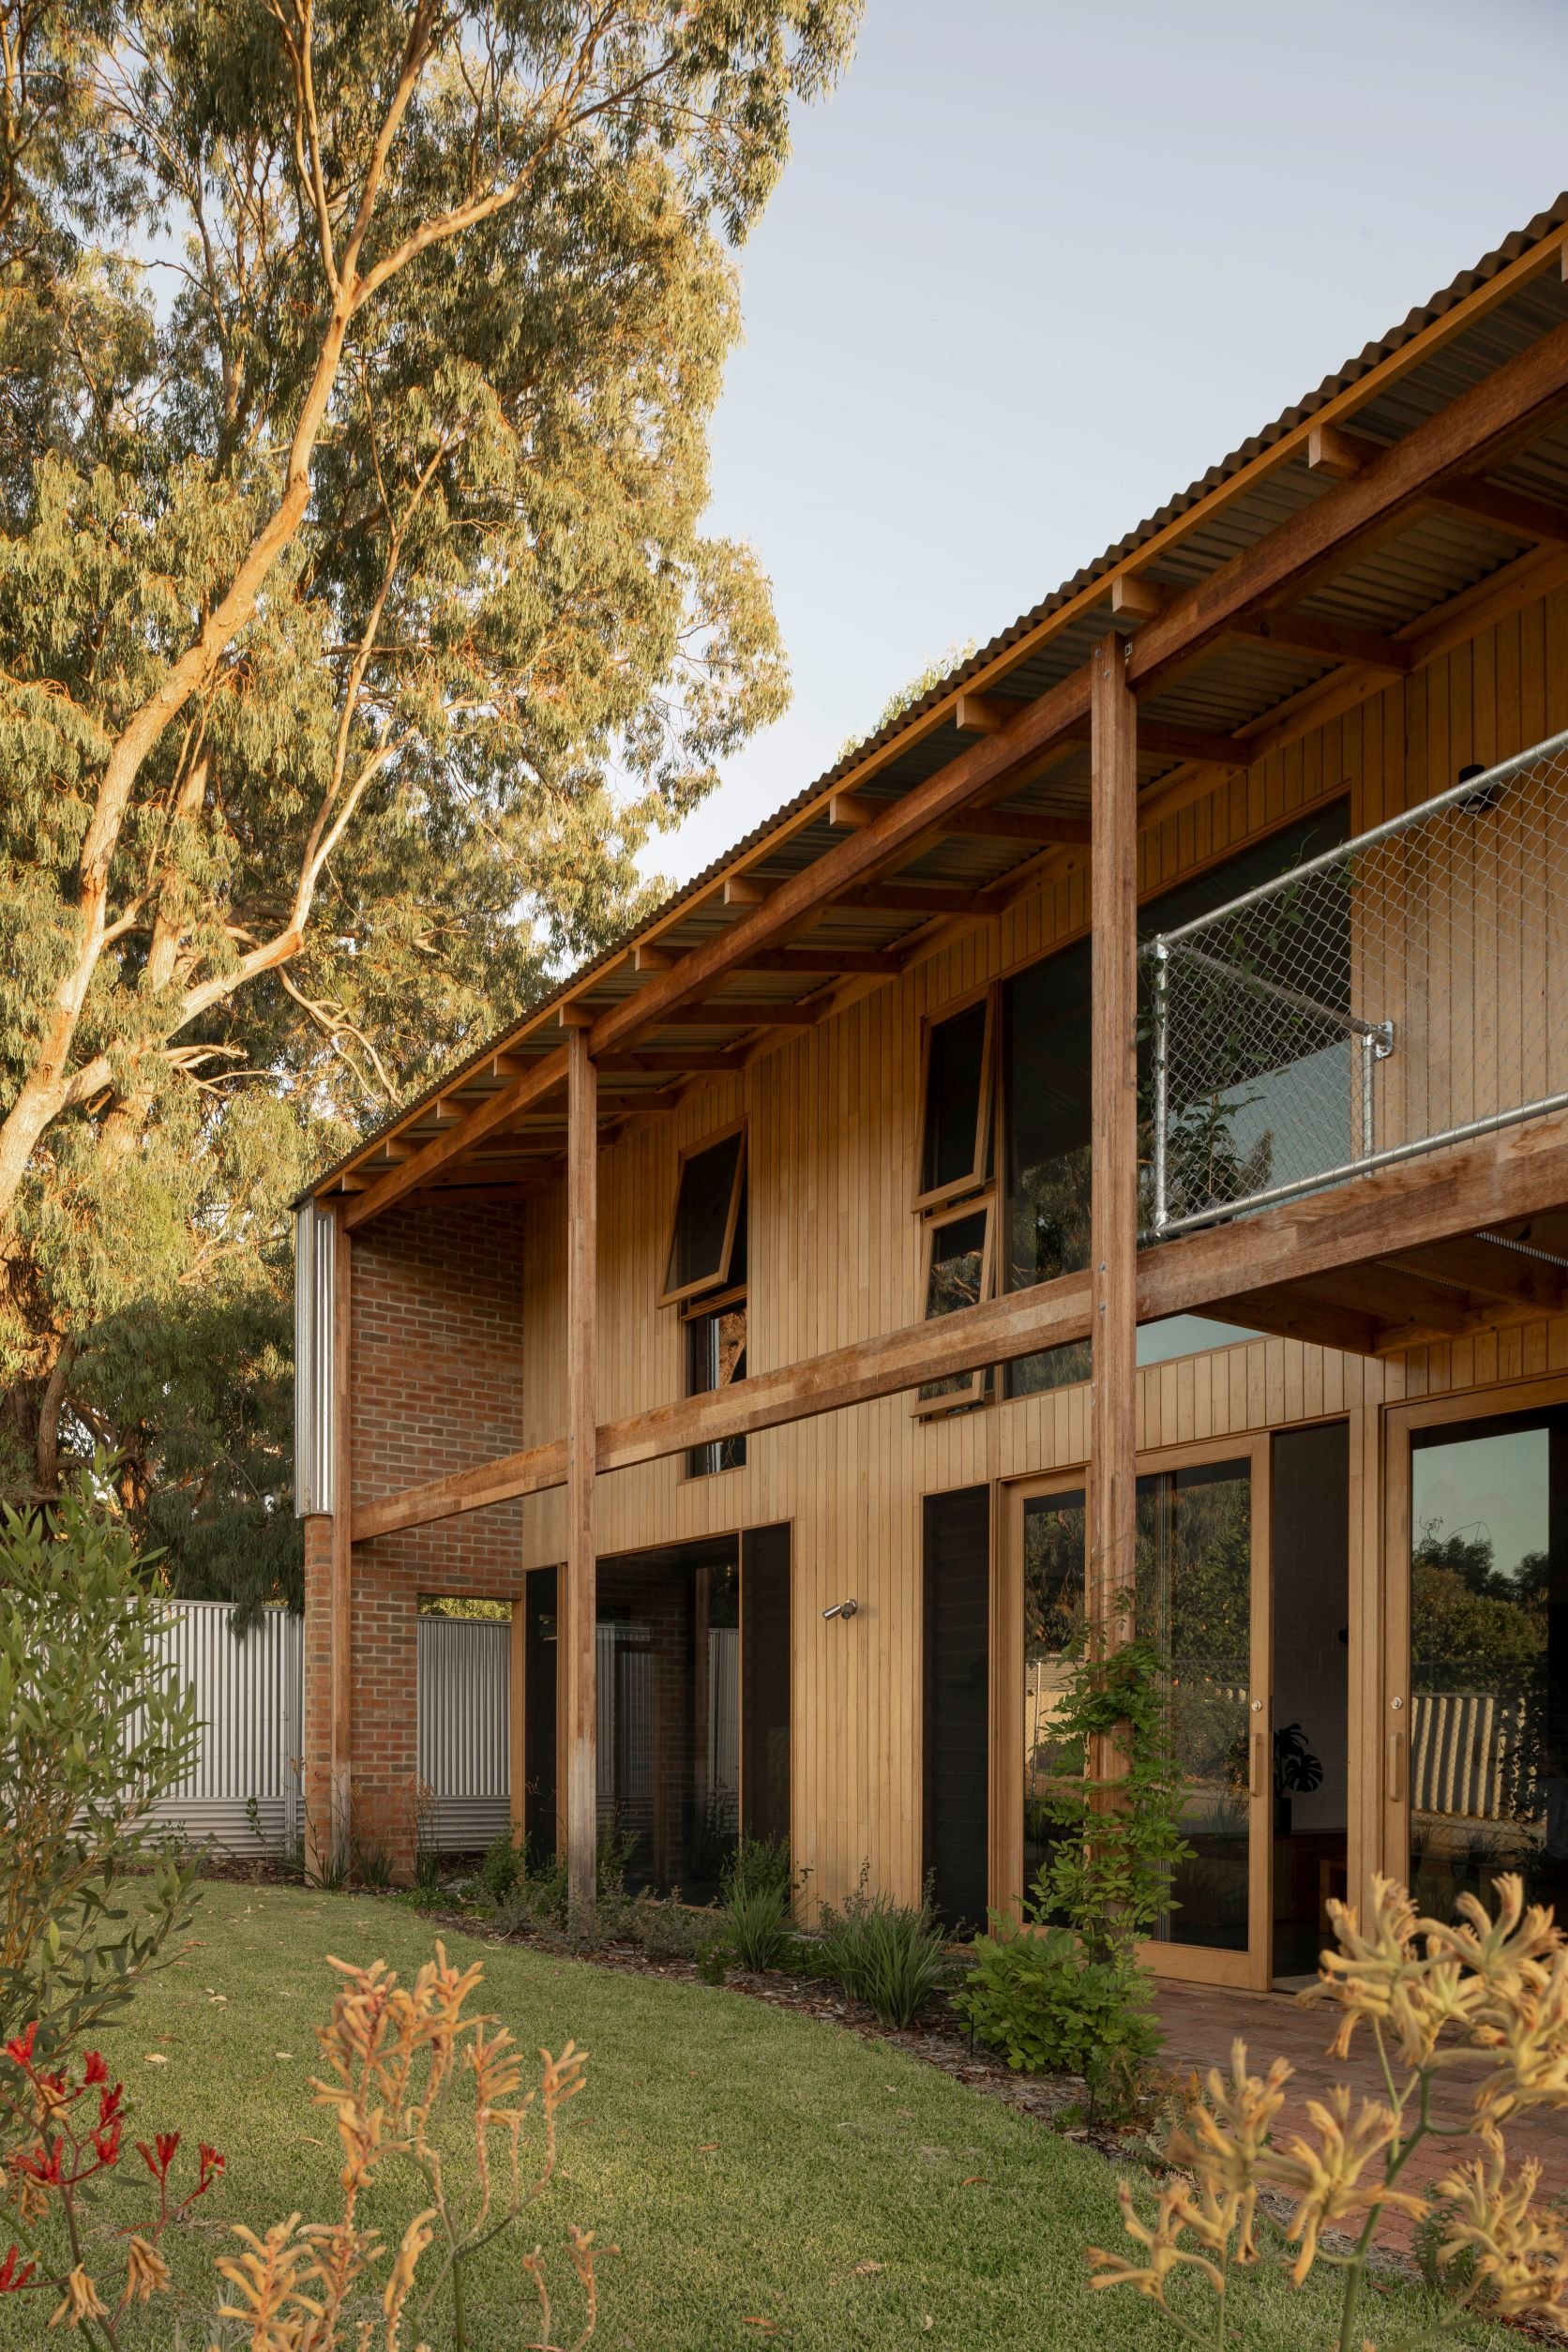 Leadership to zero carbon_net zero house by MDC architects 01 lowres.jpg